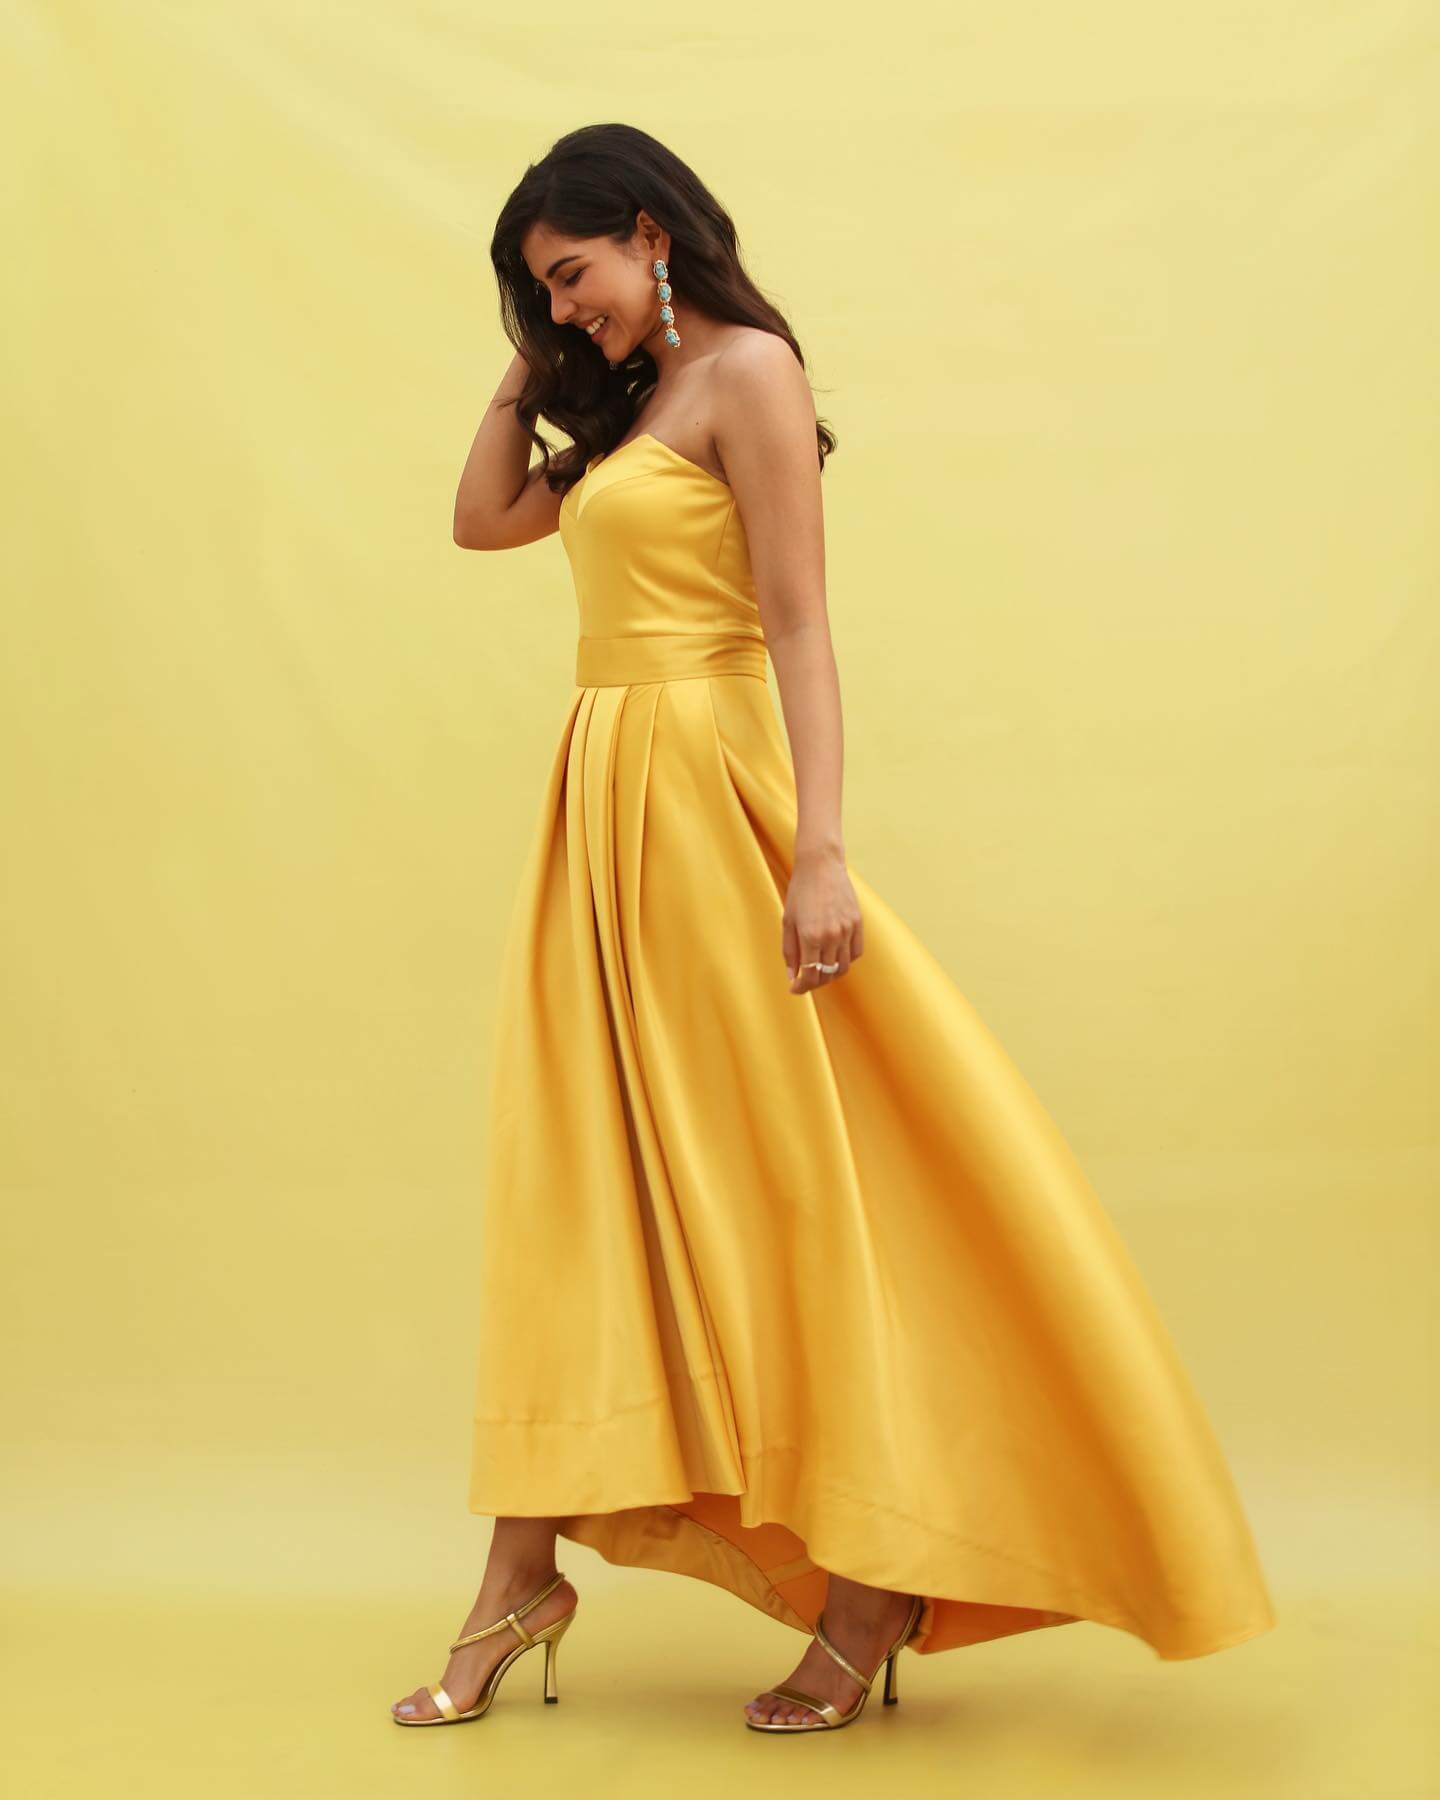 Kalyani Priyadarshan Sexy & Chic Outfits Look In Yellow Off-Shoulder Cocktail Gown